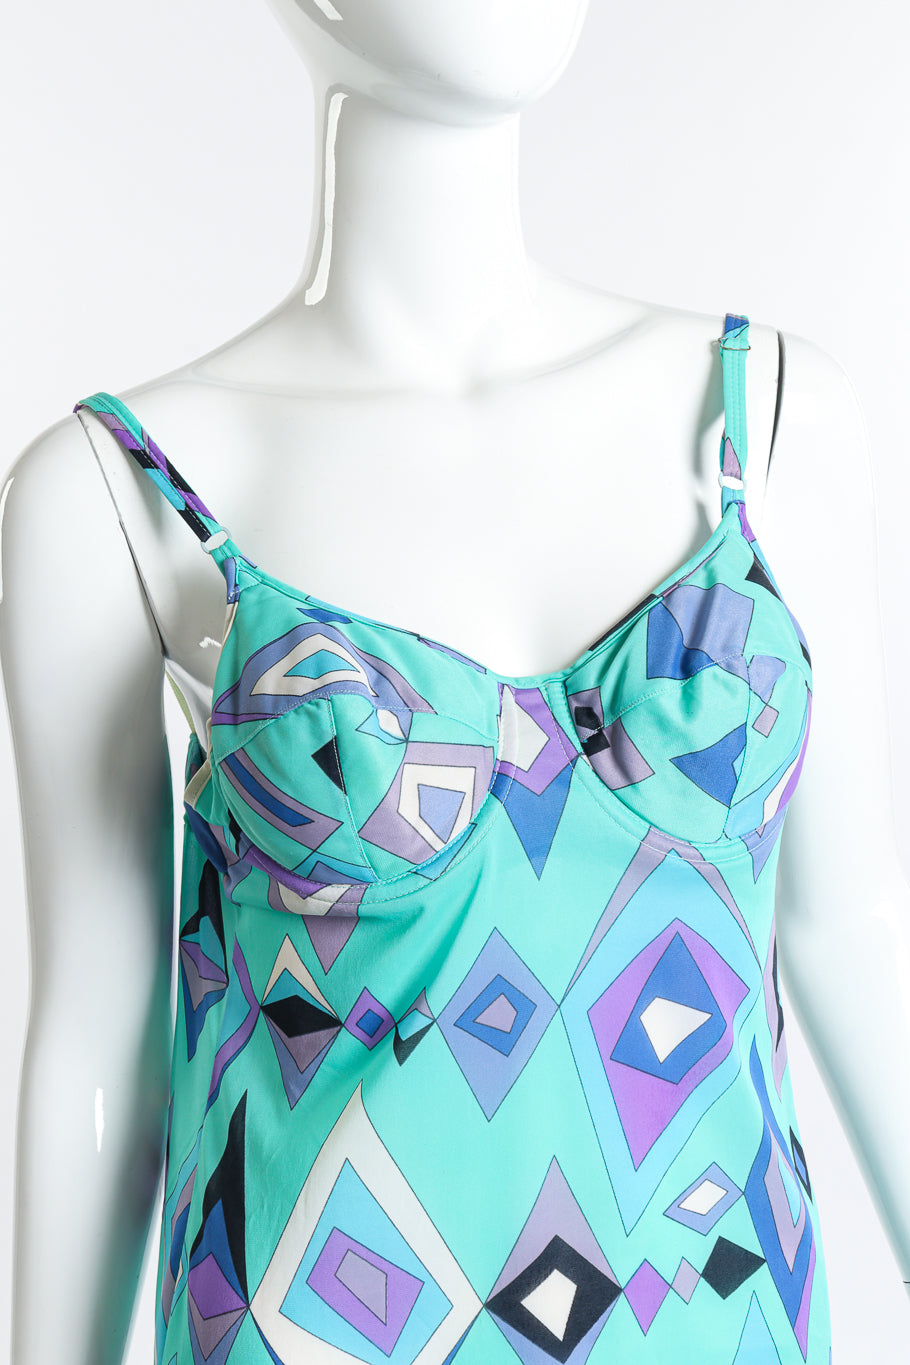 Vintage Emilio Pucci for Formfit Rogers teal purple and white geo chemise slip dress close up of slip dress front on mannequin @Recess LA